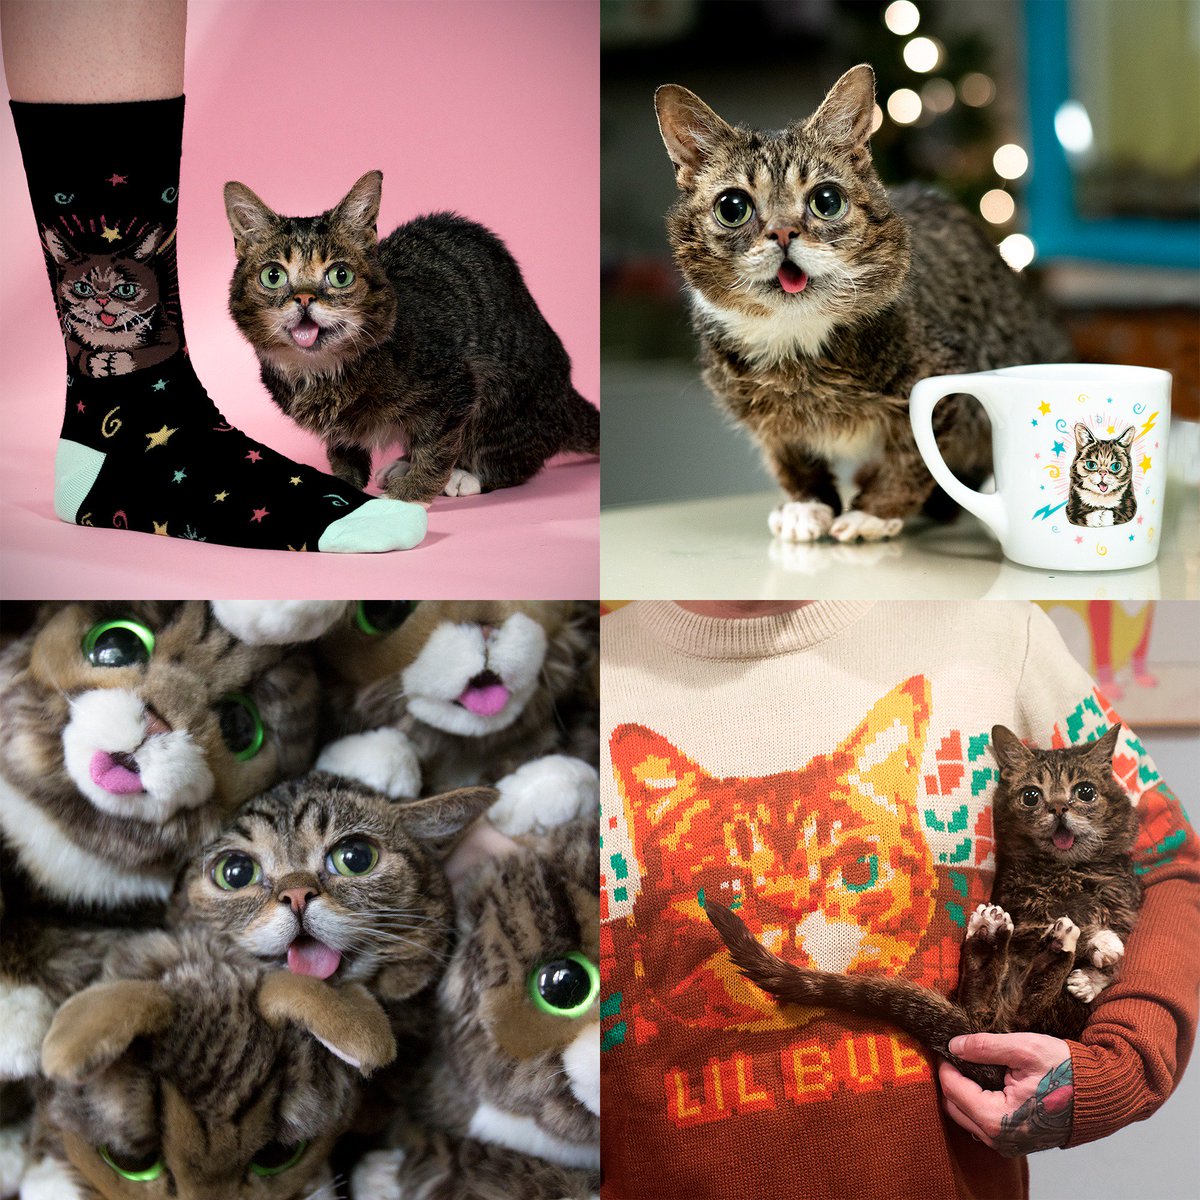 Lil BUB's Mighty Clearance Sale ends 